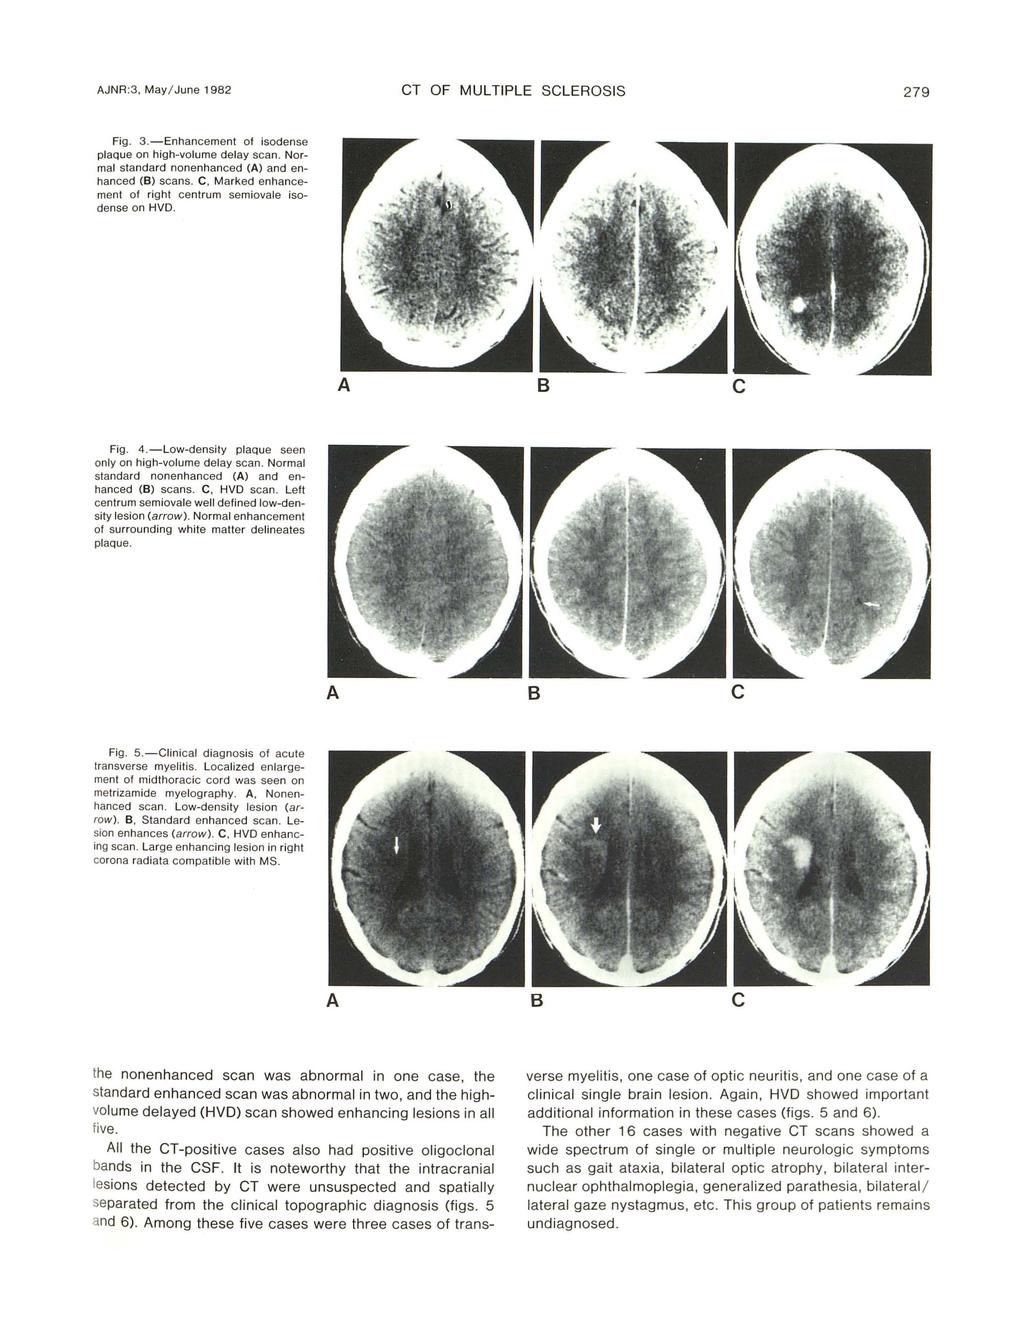 JNR:3, May/ June 1982 CT OF MULTIPLE SCLEROSIS 279 Fig. 3.-Enhanement of isodense plaque on high-volume delay san. Normal standard nonenhaned () and enhaned () sans.